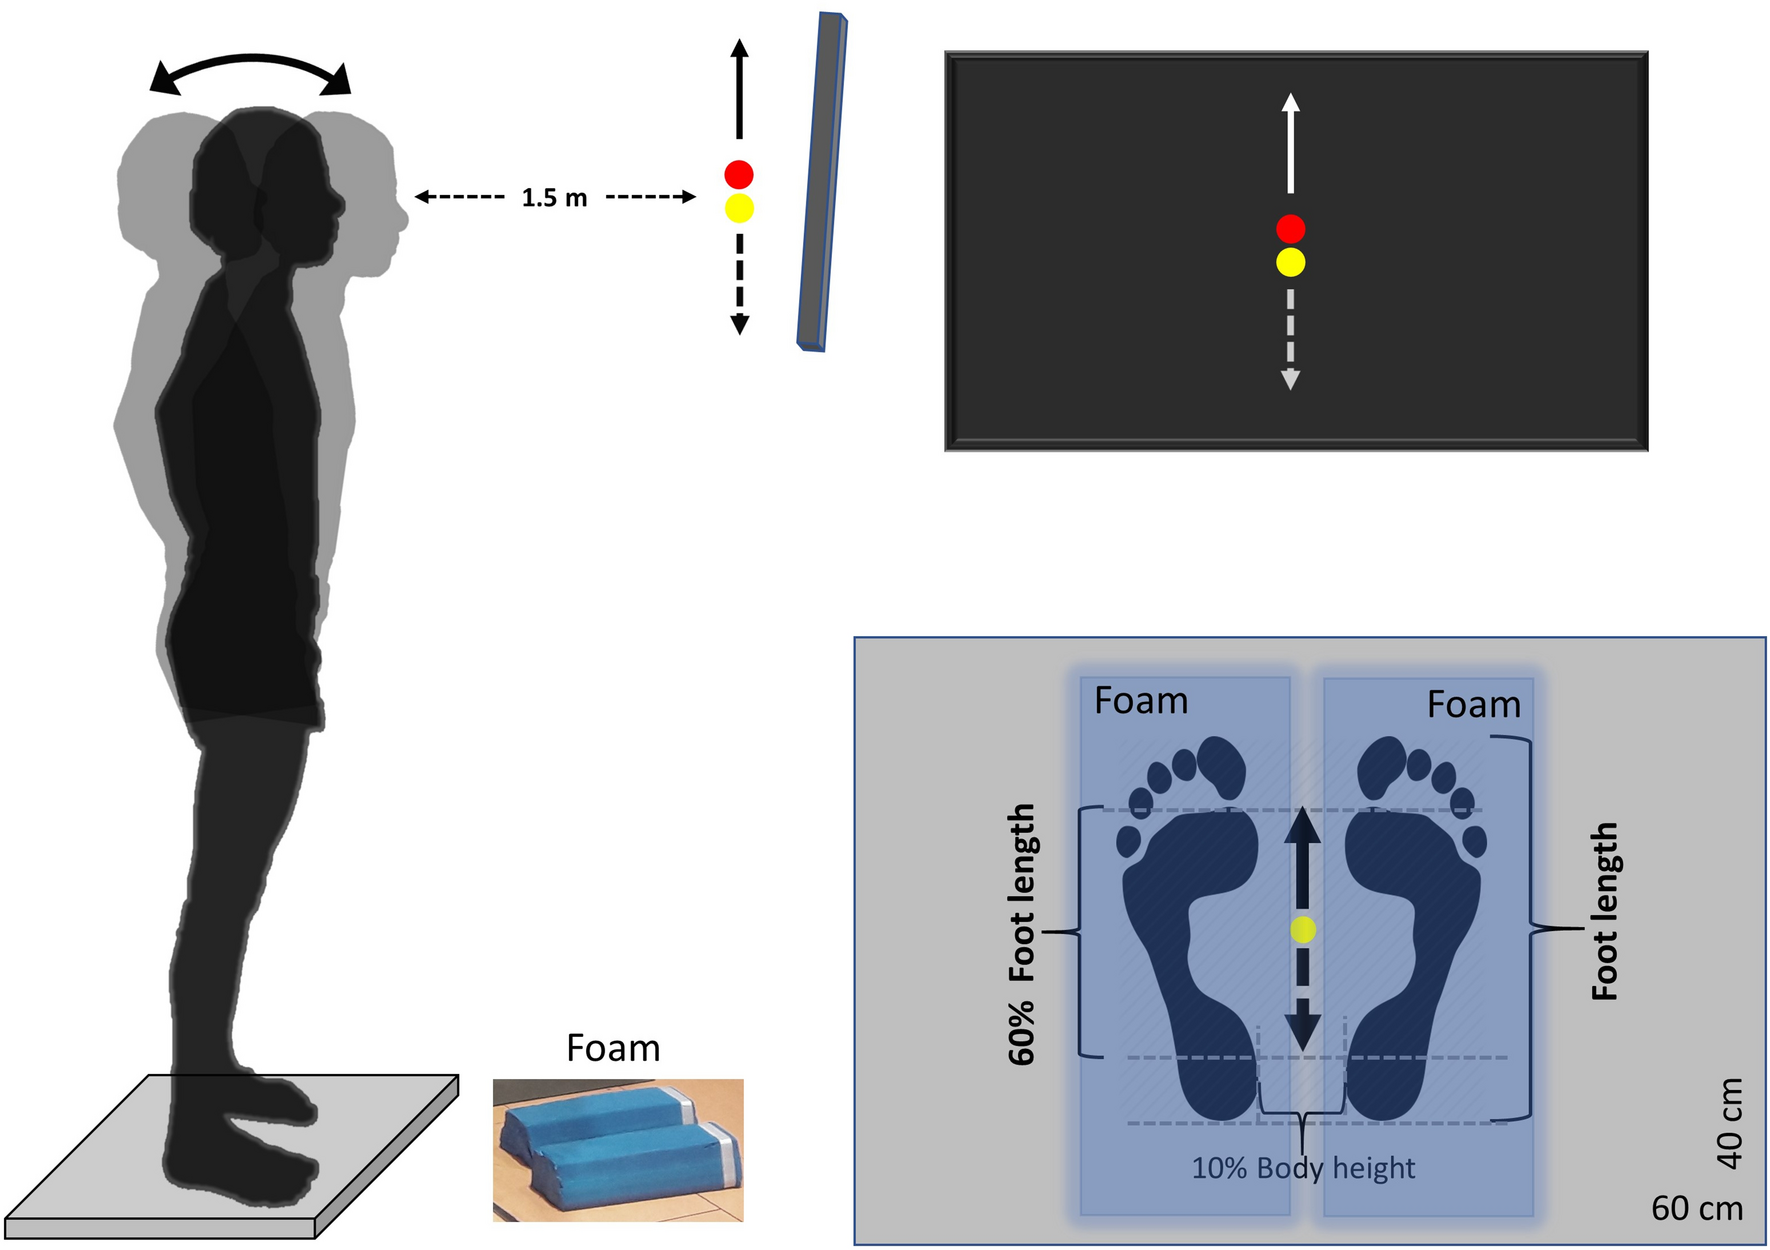 Standing on unstable surface challenges postural control of tracking tasks  and modulates neuromuscular adjustments specific to task complexity |  Scientific Reports